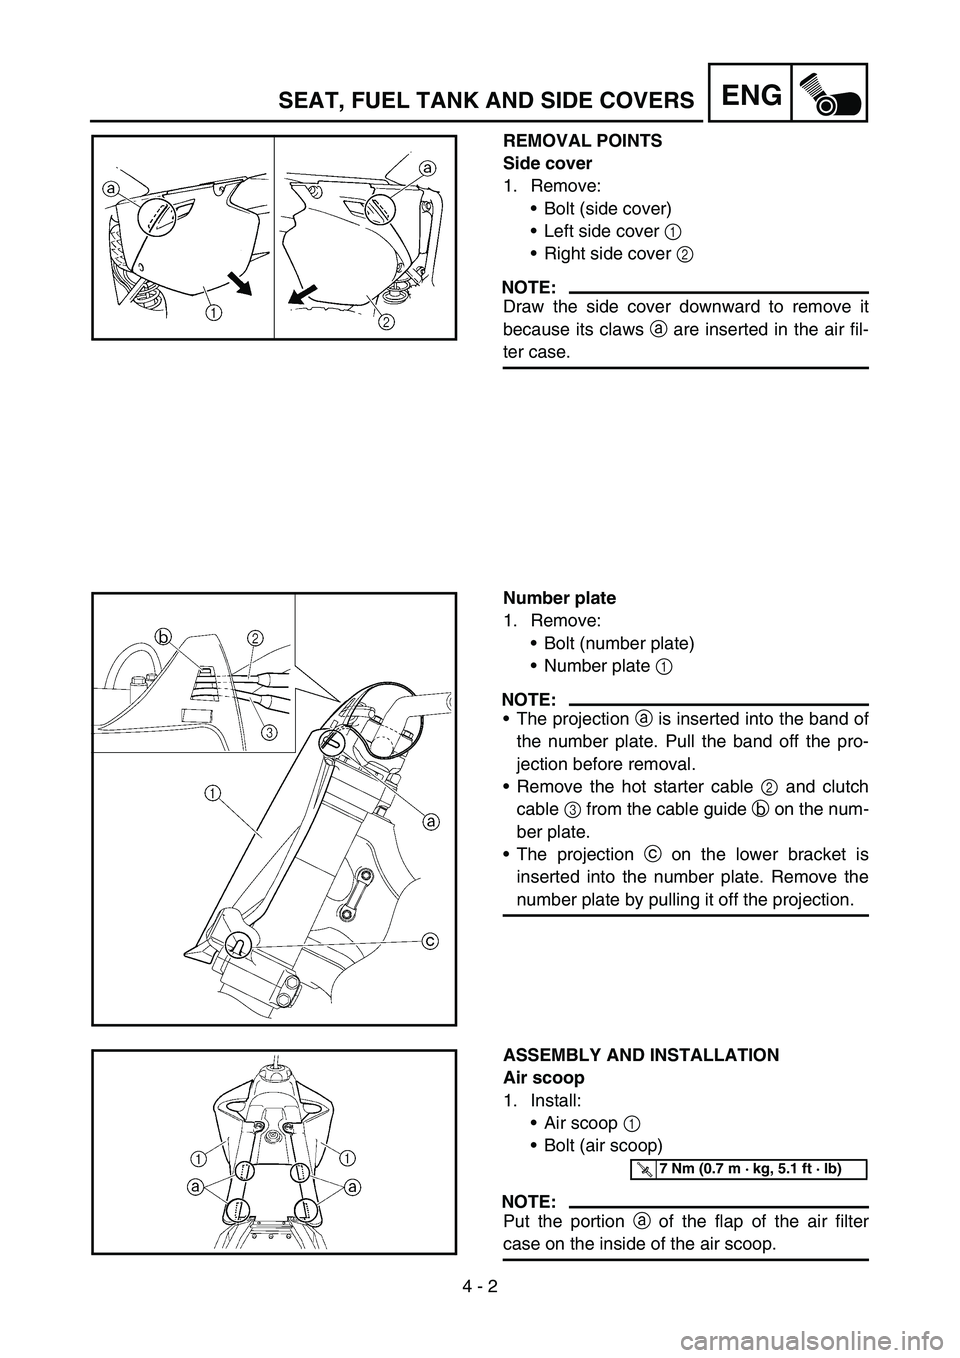 YAMAHA YZ250F 2007  Owners Manual 4 - 2
ENG
REMOVAL POINTS
Side cover
1. Remove:
Bolt (side cover)
Left side cover 1 
Right side cover 2 
NOTE:
Draw the side cover downward to remove it
because its claws a are inserted in the air f